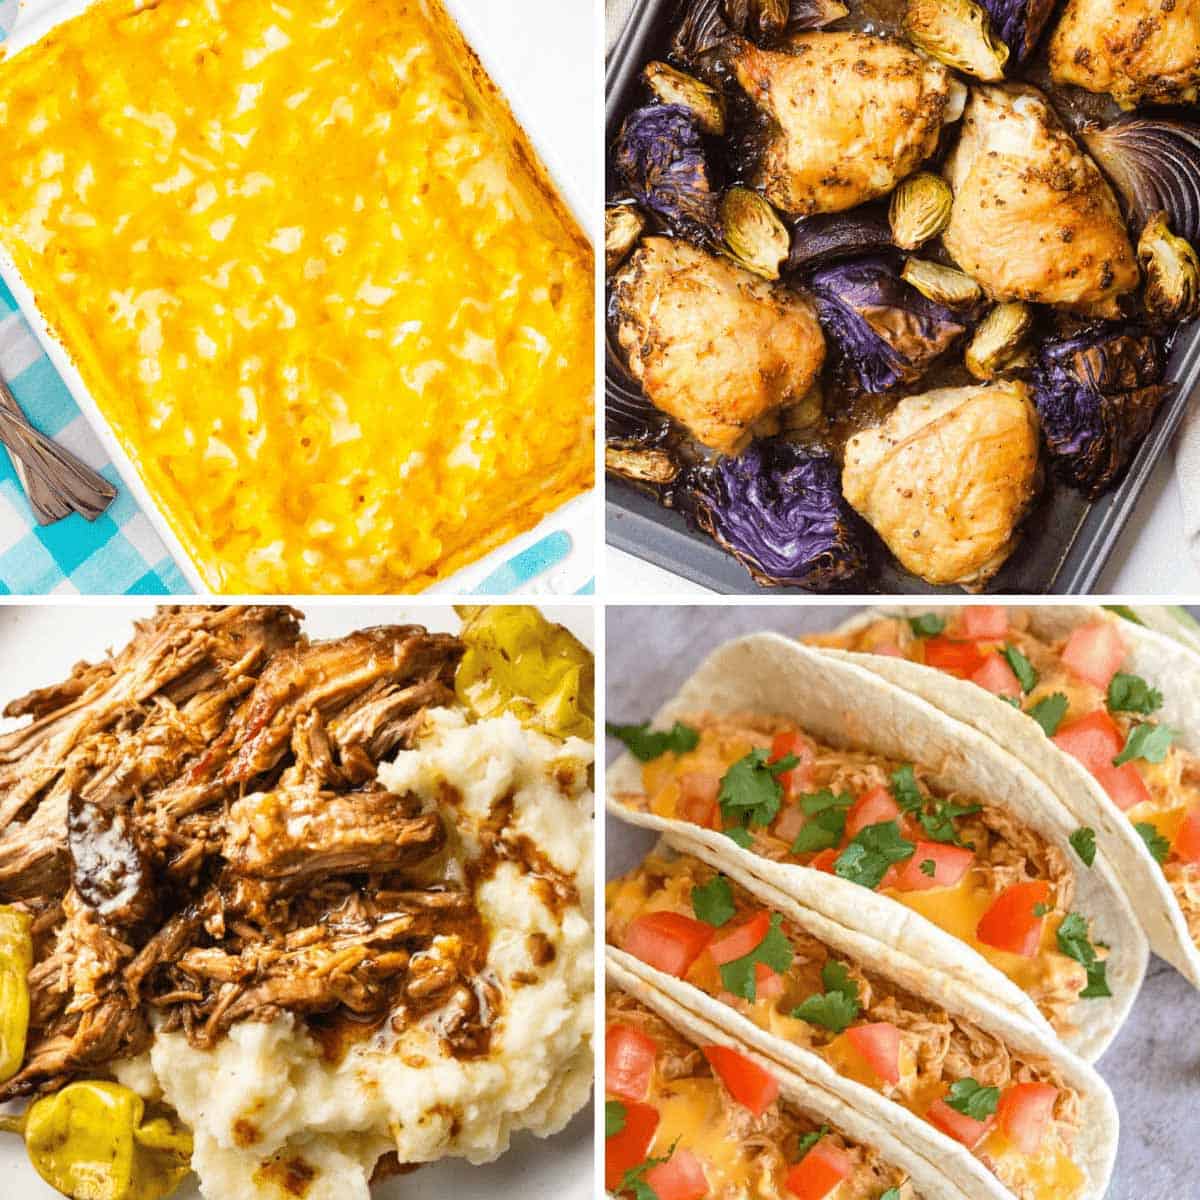 Four Sunday dinner ideas: mac and cheese, chicken thighs, Mississippi pot roast, and tacos.